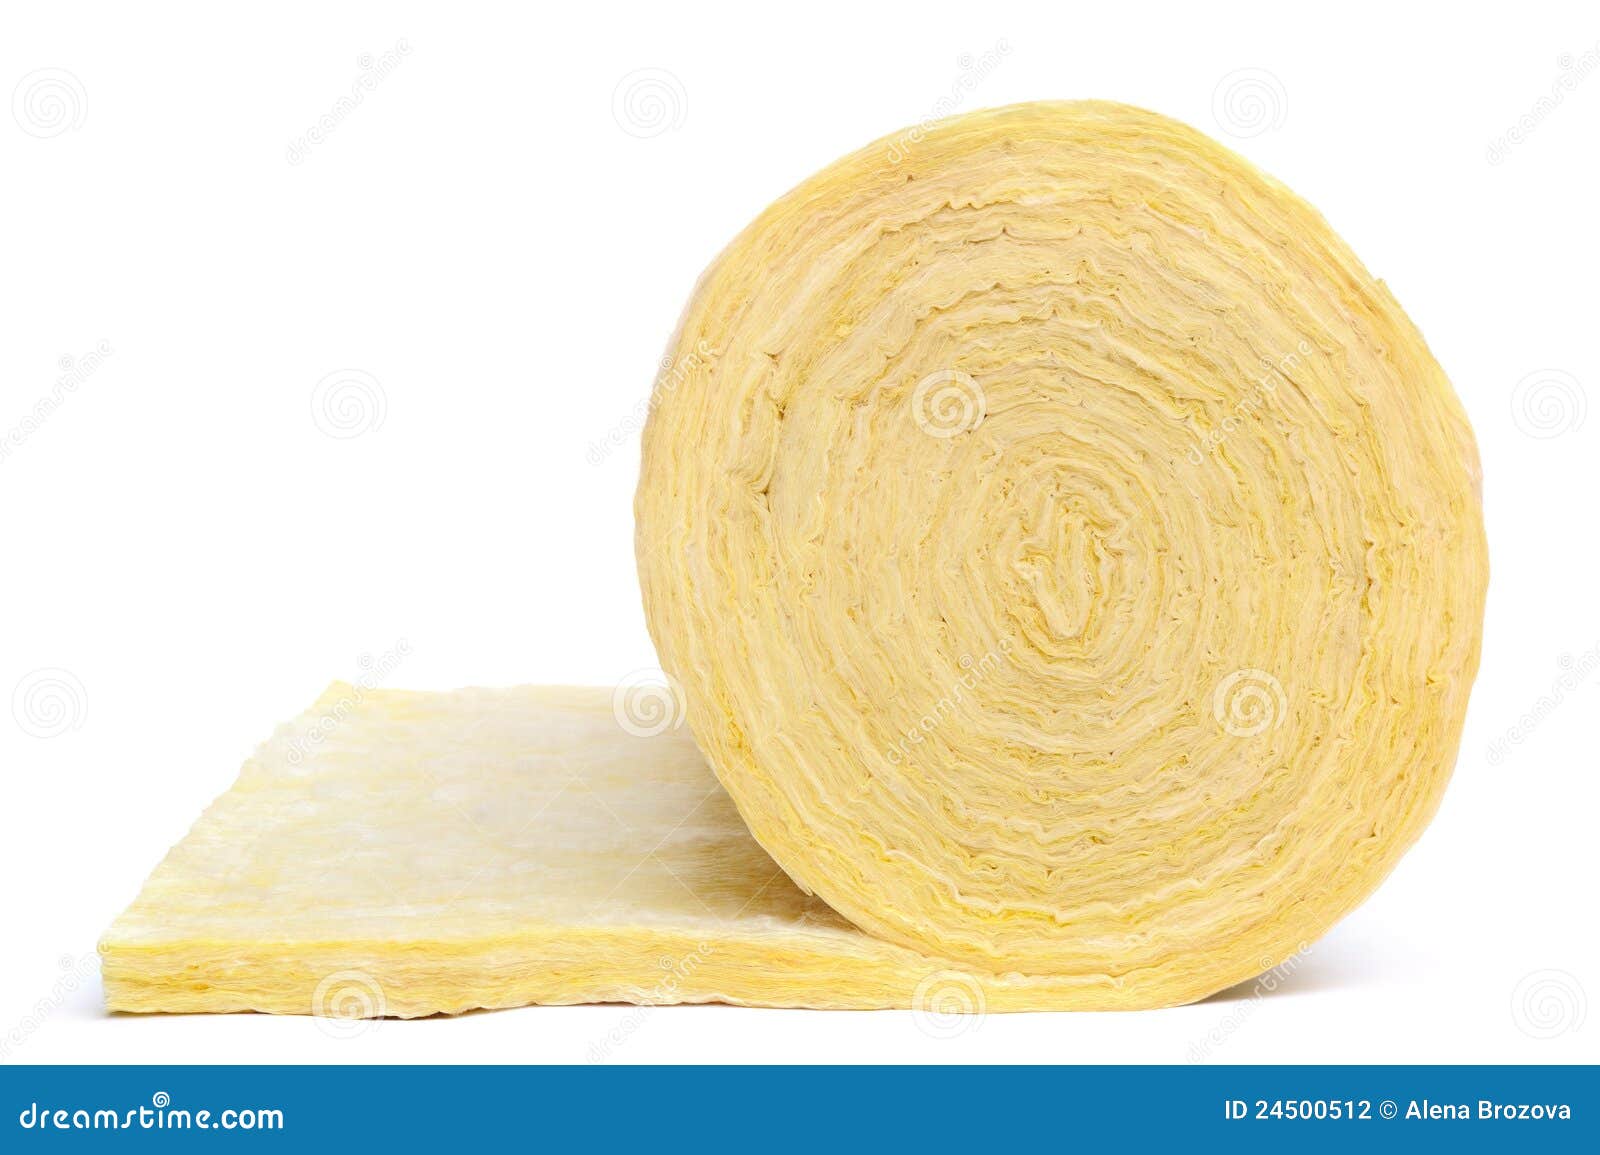 Roll of Fiberglass Insulation Material Stock Photo - Image of